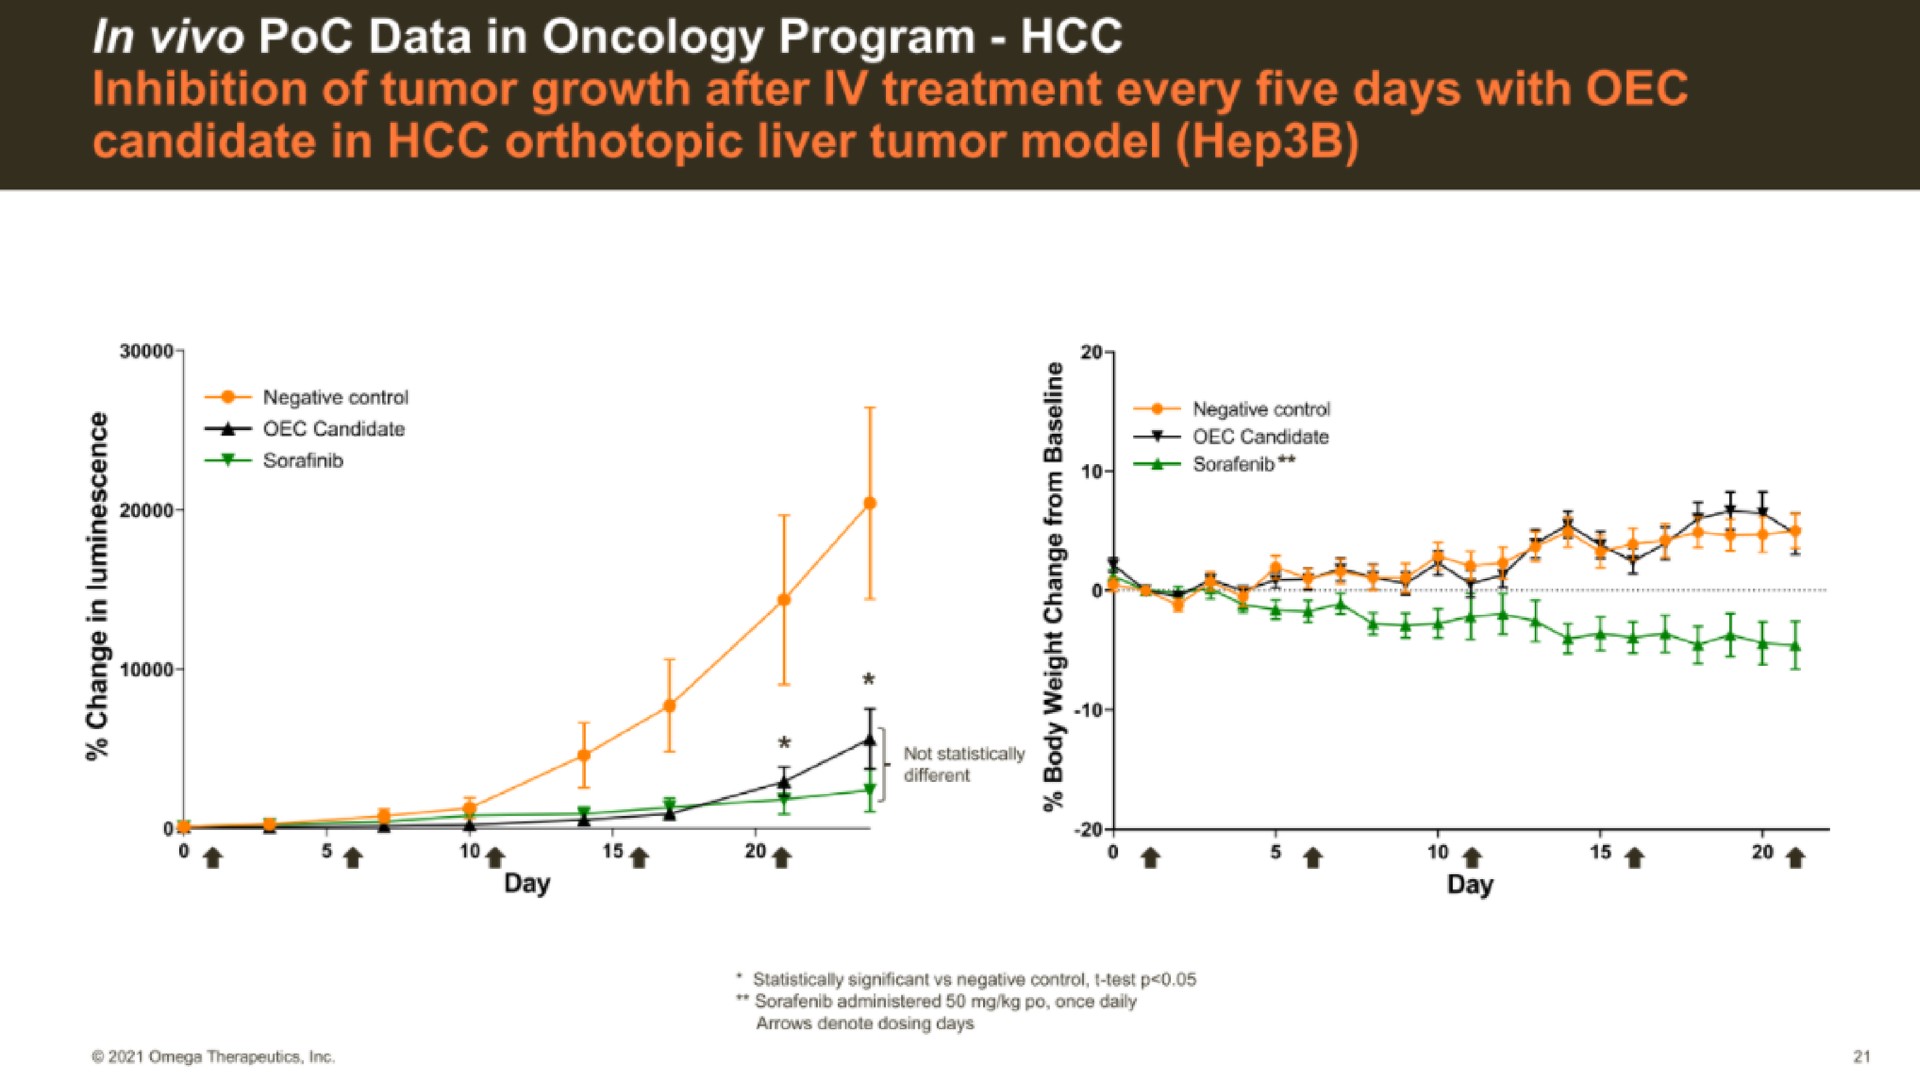 in data in oncology program | Omega Therapeutics